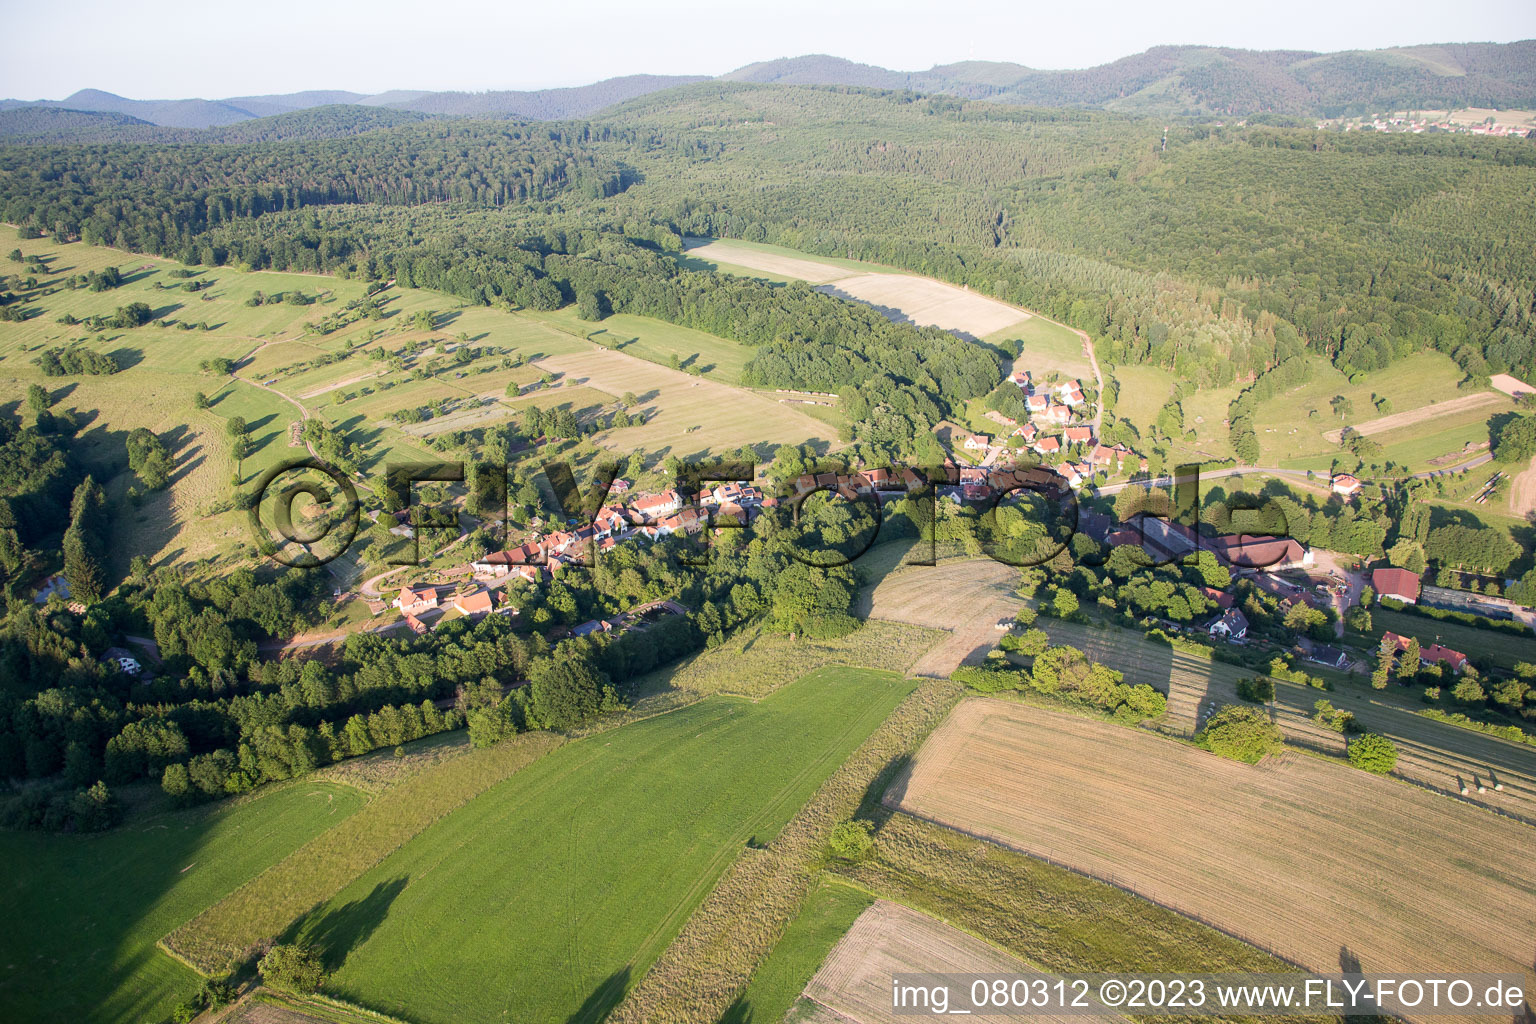 Wingen in the state Bas-Rhin, France seen from above